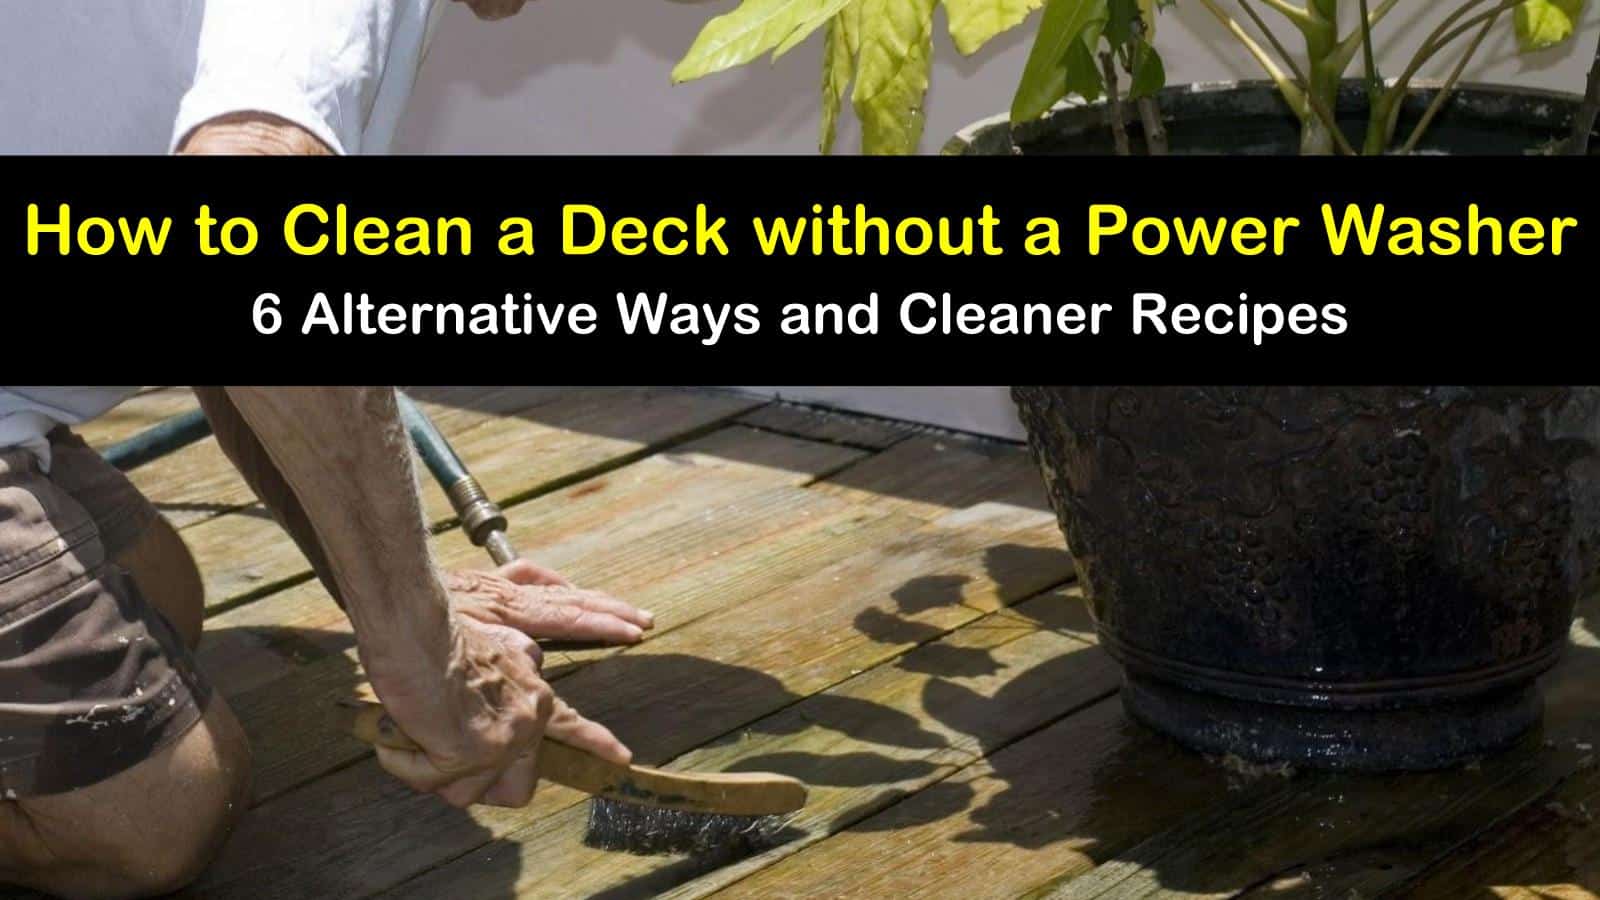 how to clean a deck without a power washer titleimg1